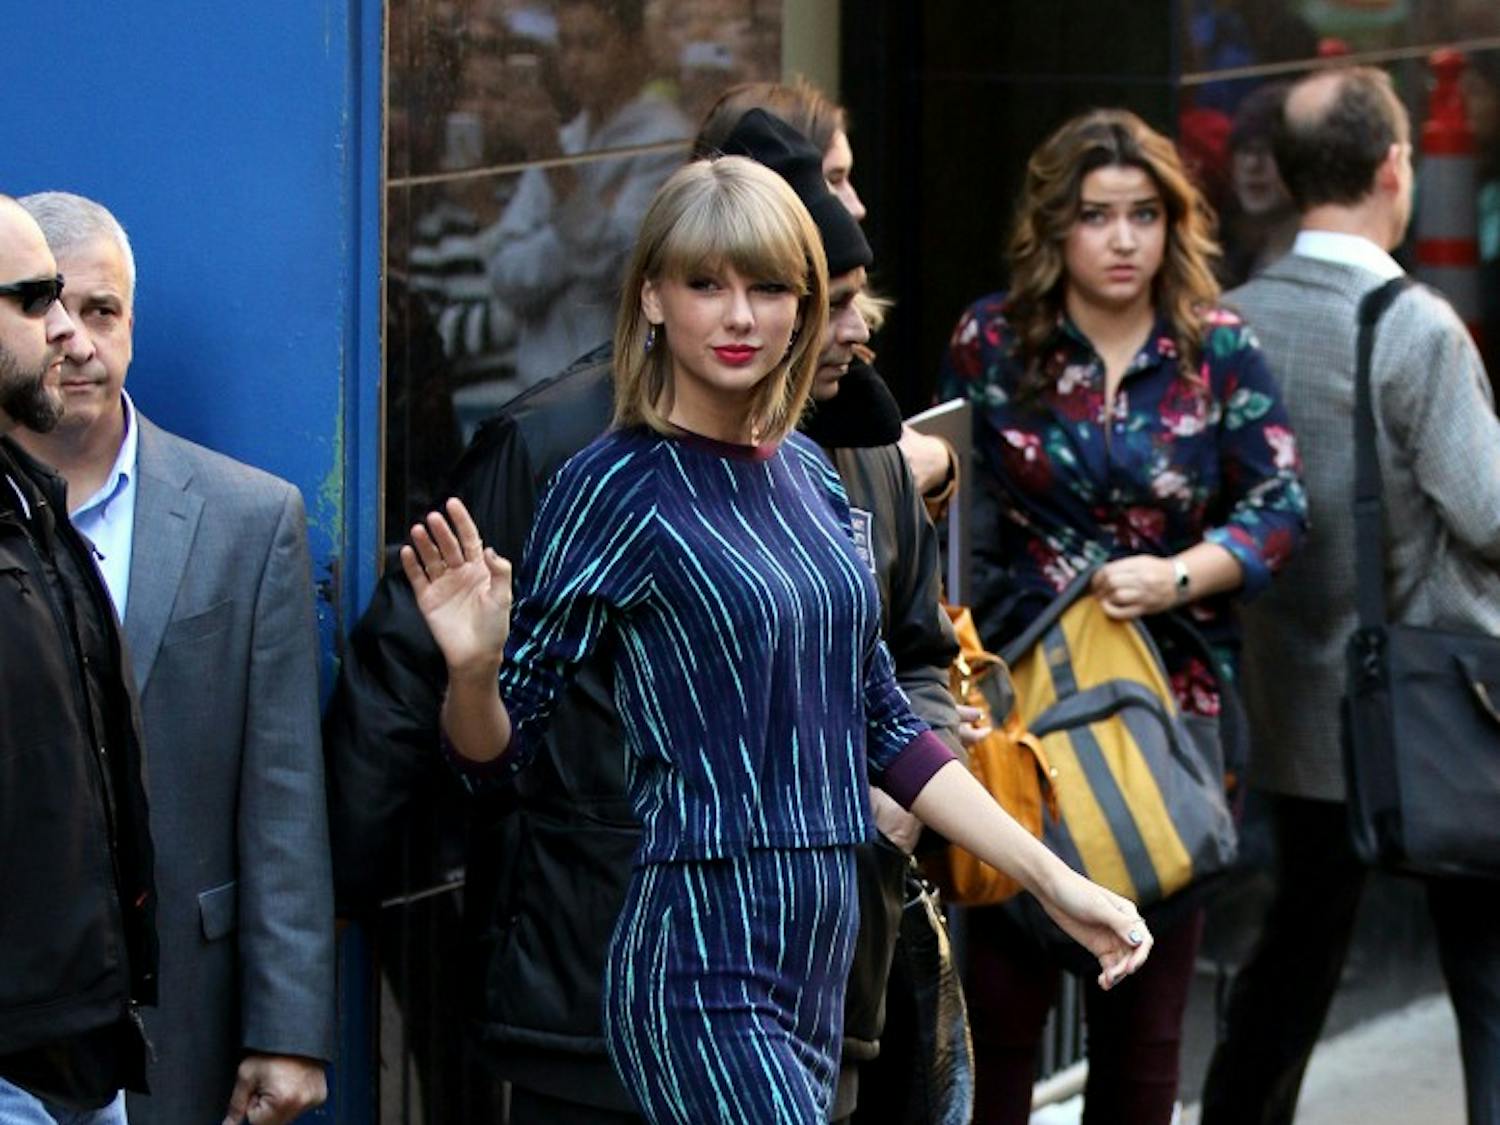 Taylor Swift makes an appearance at Good Morning America on Oct. 27, 2014. (Zelig Shaul/Ace Pictures/Zuma Press/MCT)